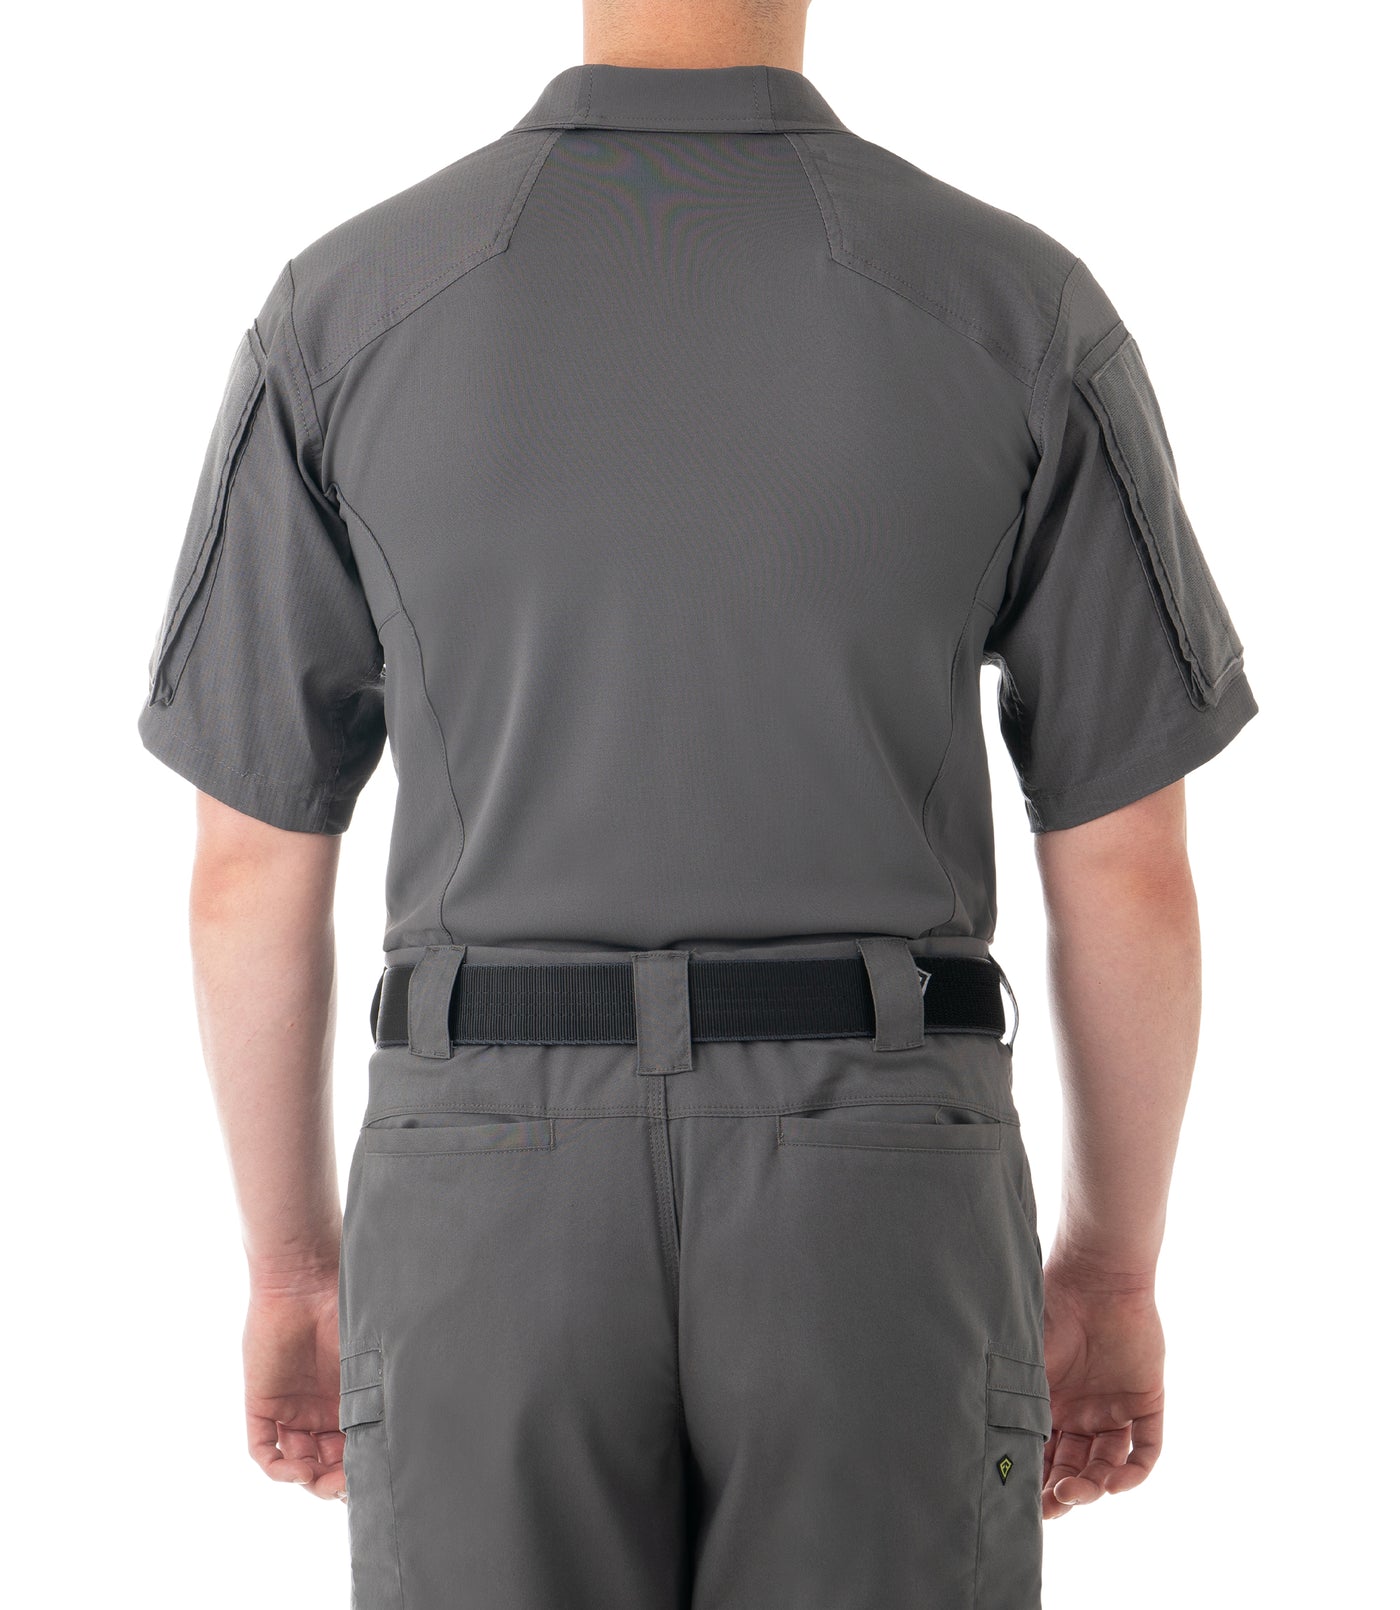 First Tactical Introduces Defender Series Pant and Shirt